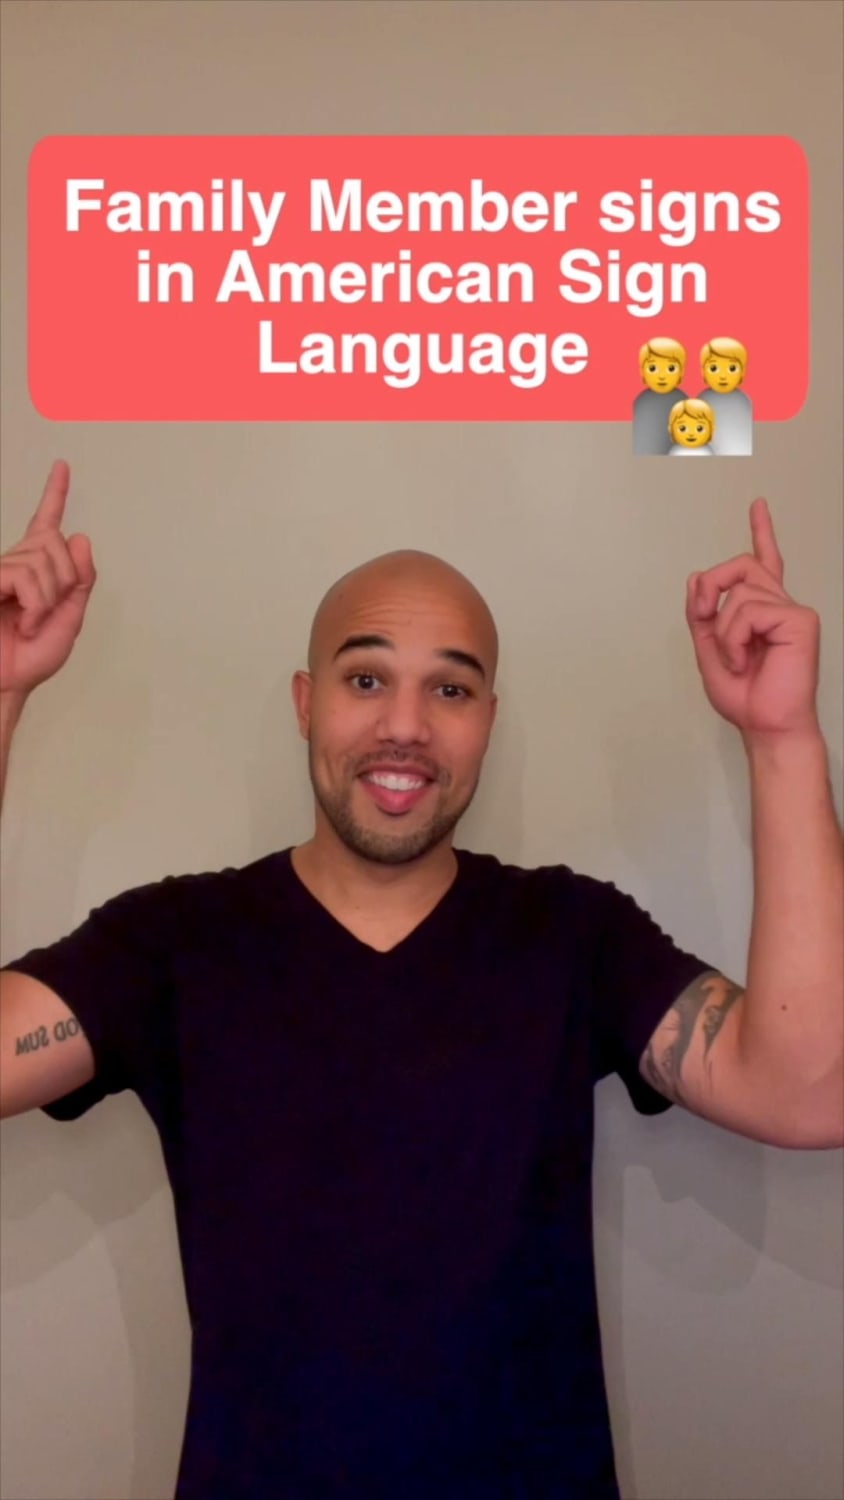 Family Member signs in American Sign Language - Part 1